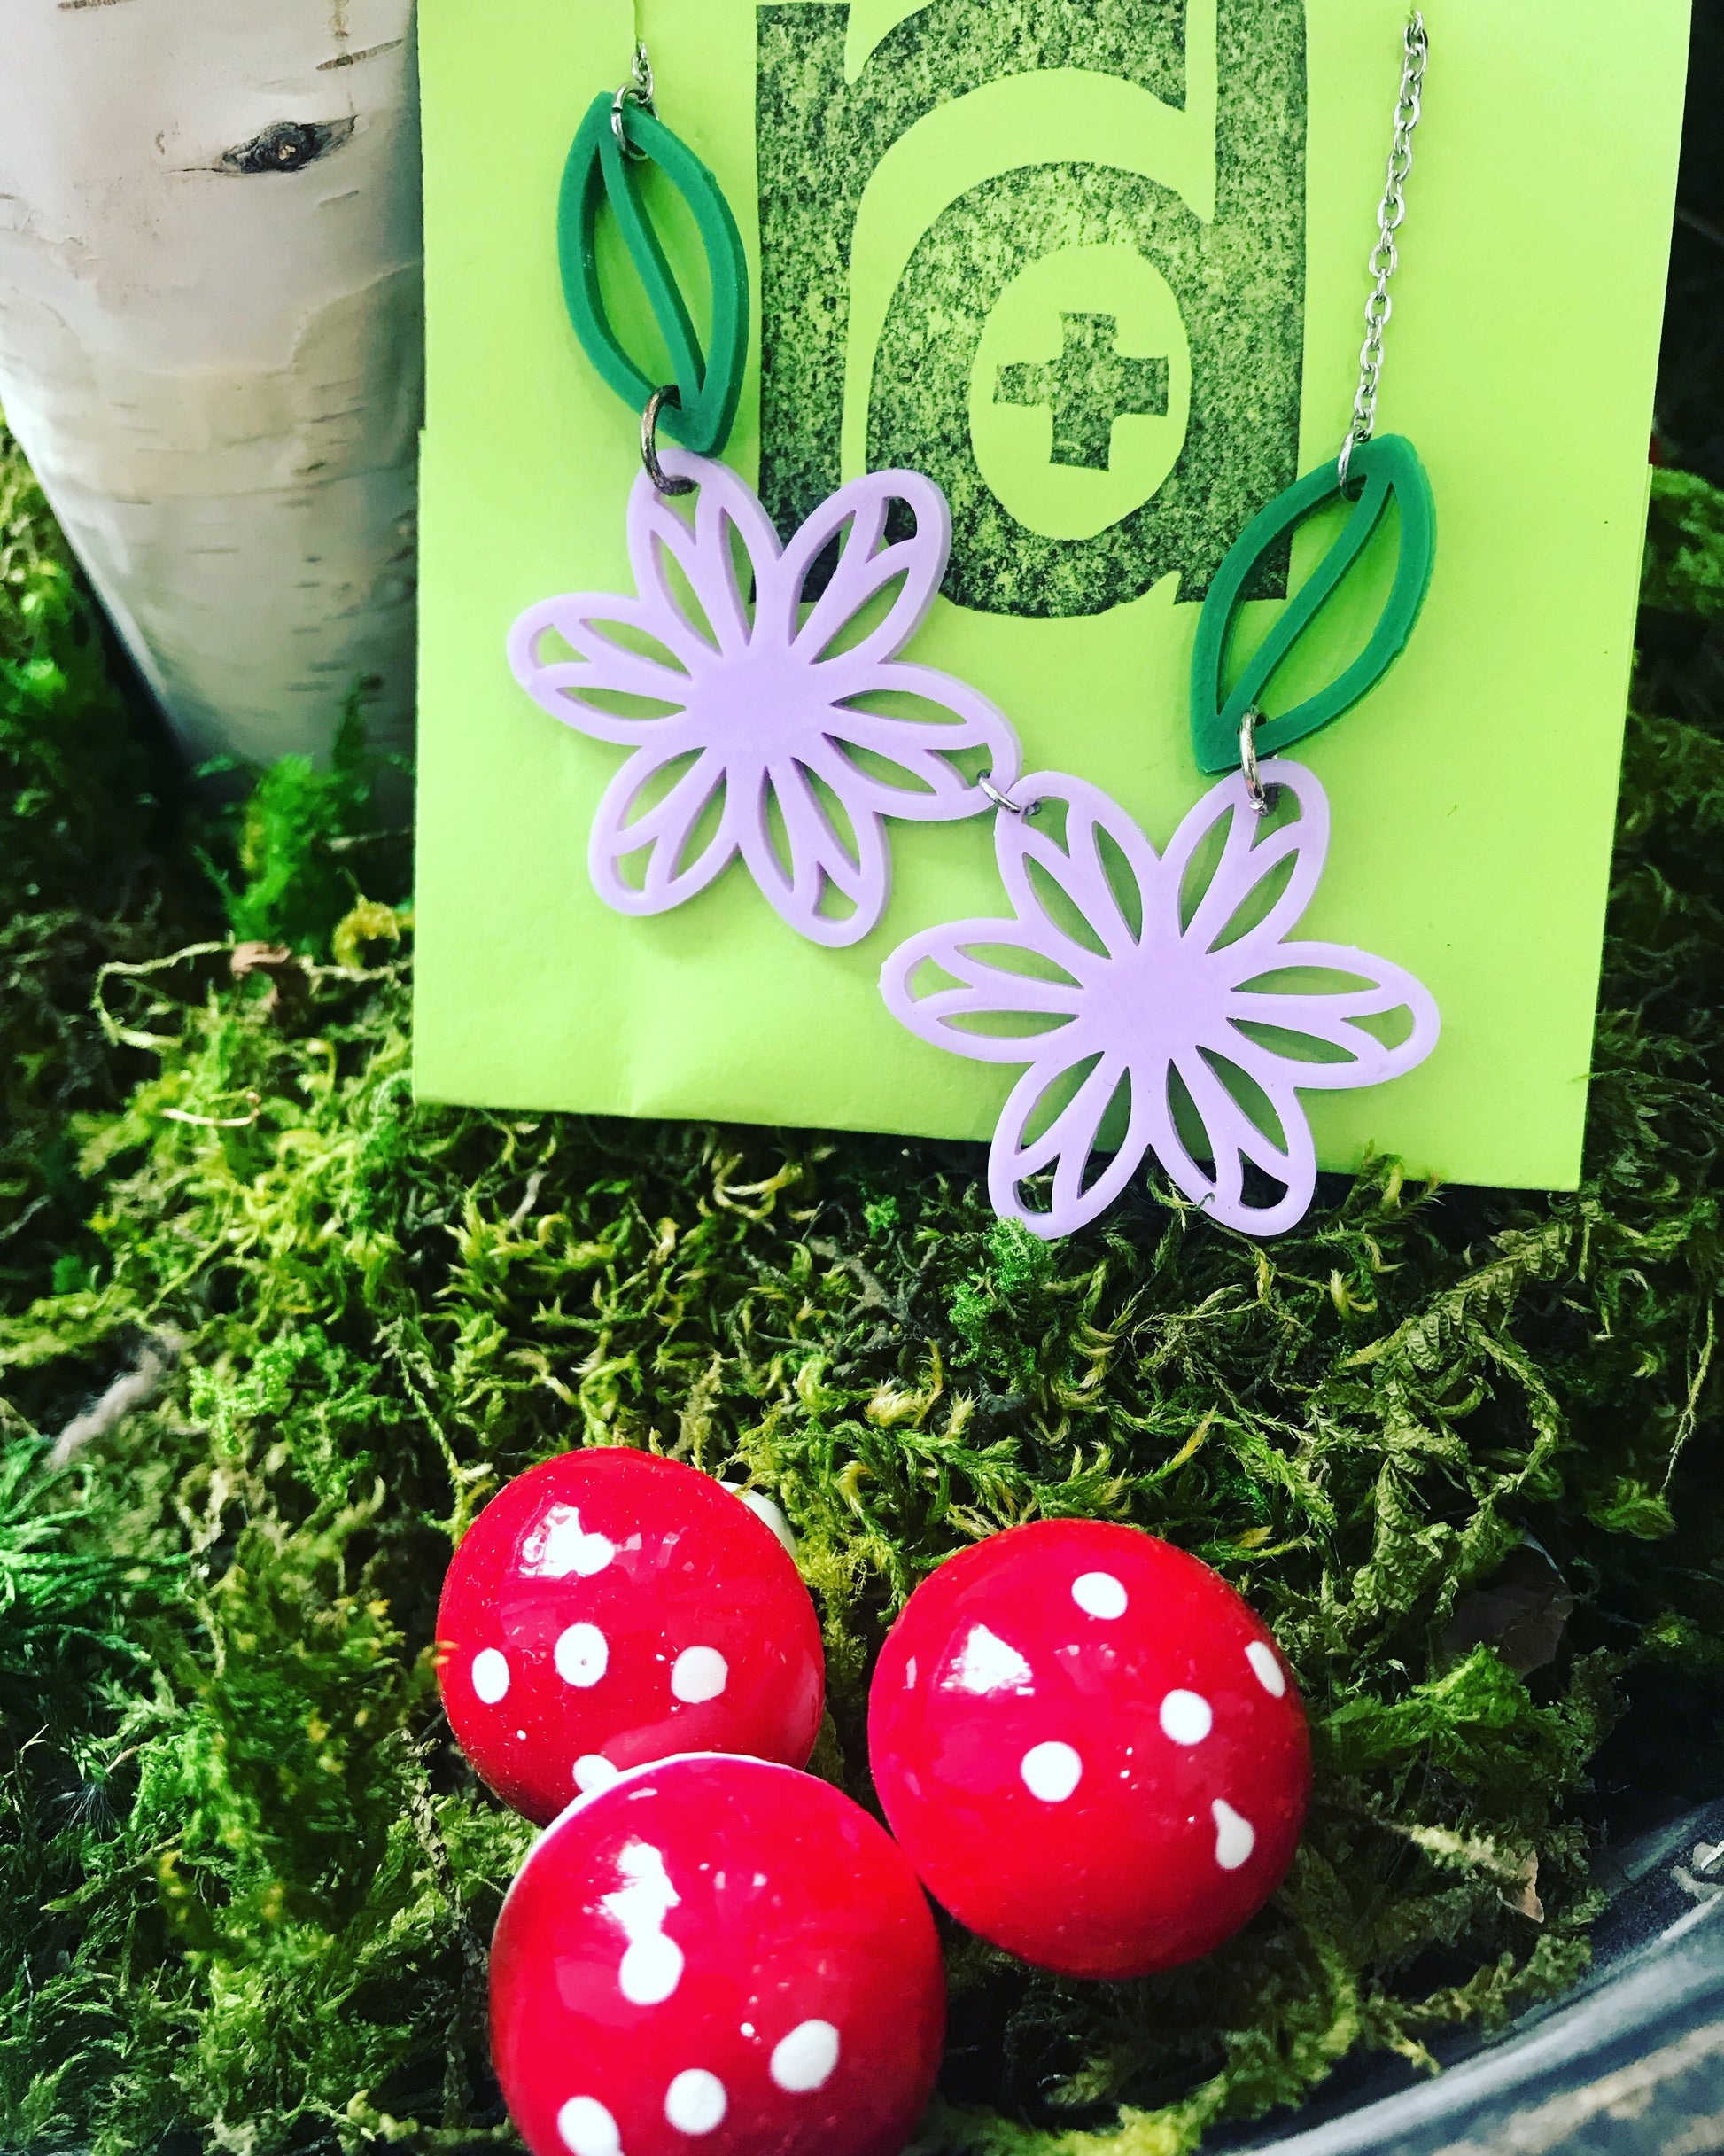 Sitting in a bed of green moss with red and white mushrooms is an R+D necklace on a card. The necklace is 3d printed and has two light purple flowers and two kelly green  leaves. 